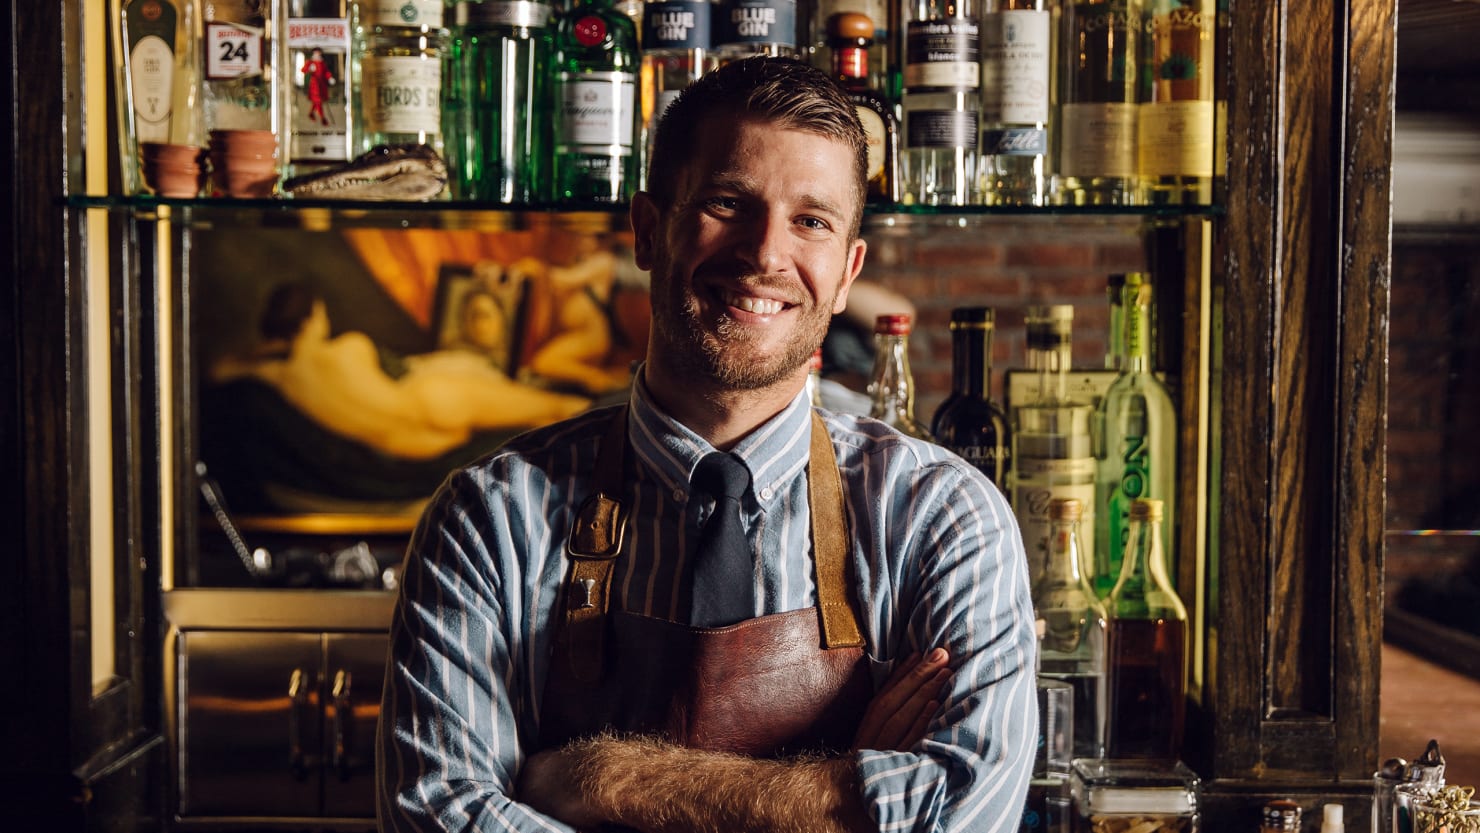 Going 10 Rounds With America’s Best Bartender, Jeff Bell